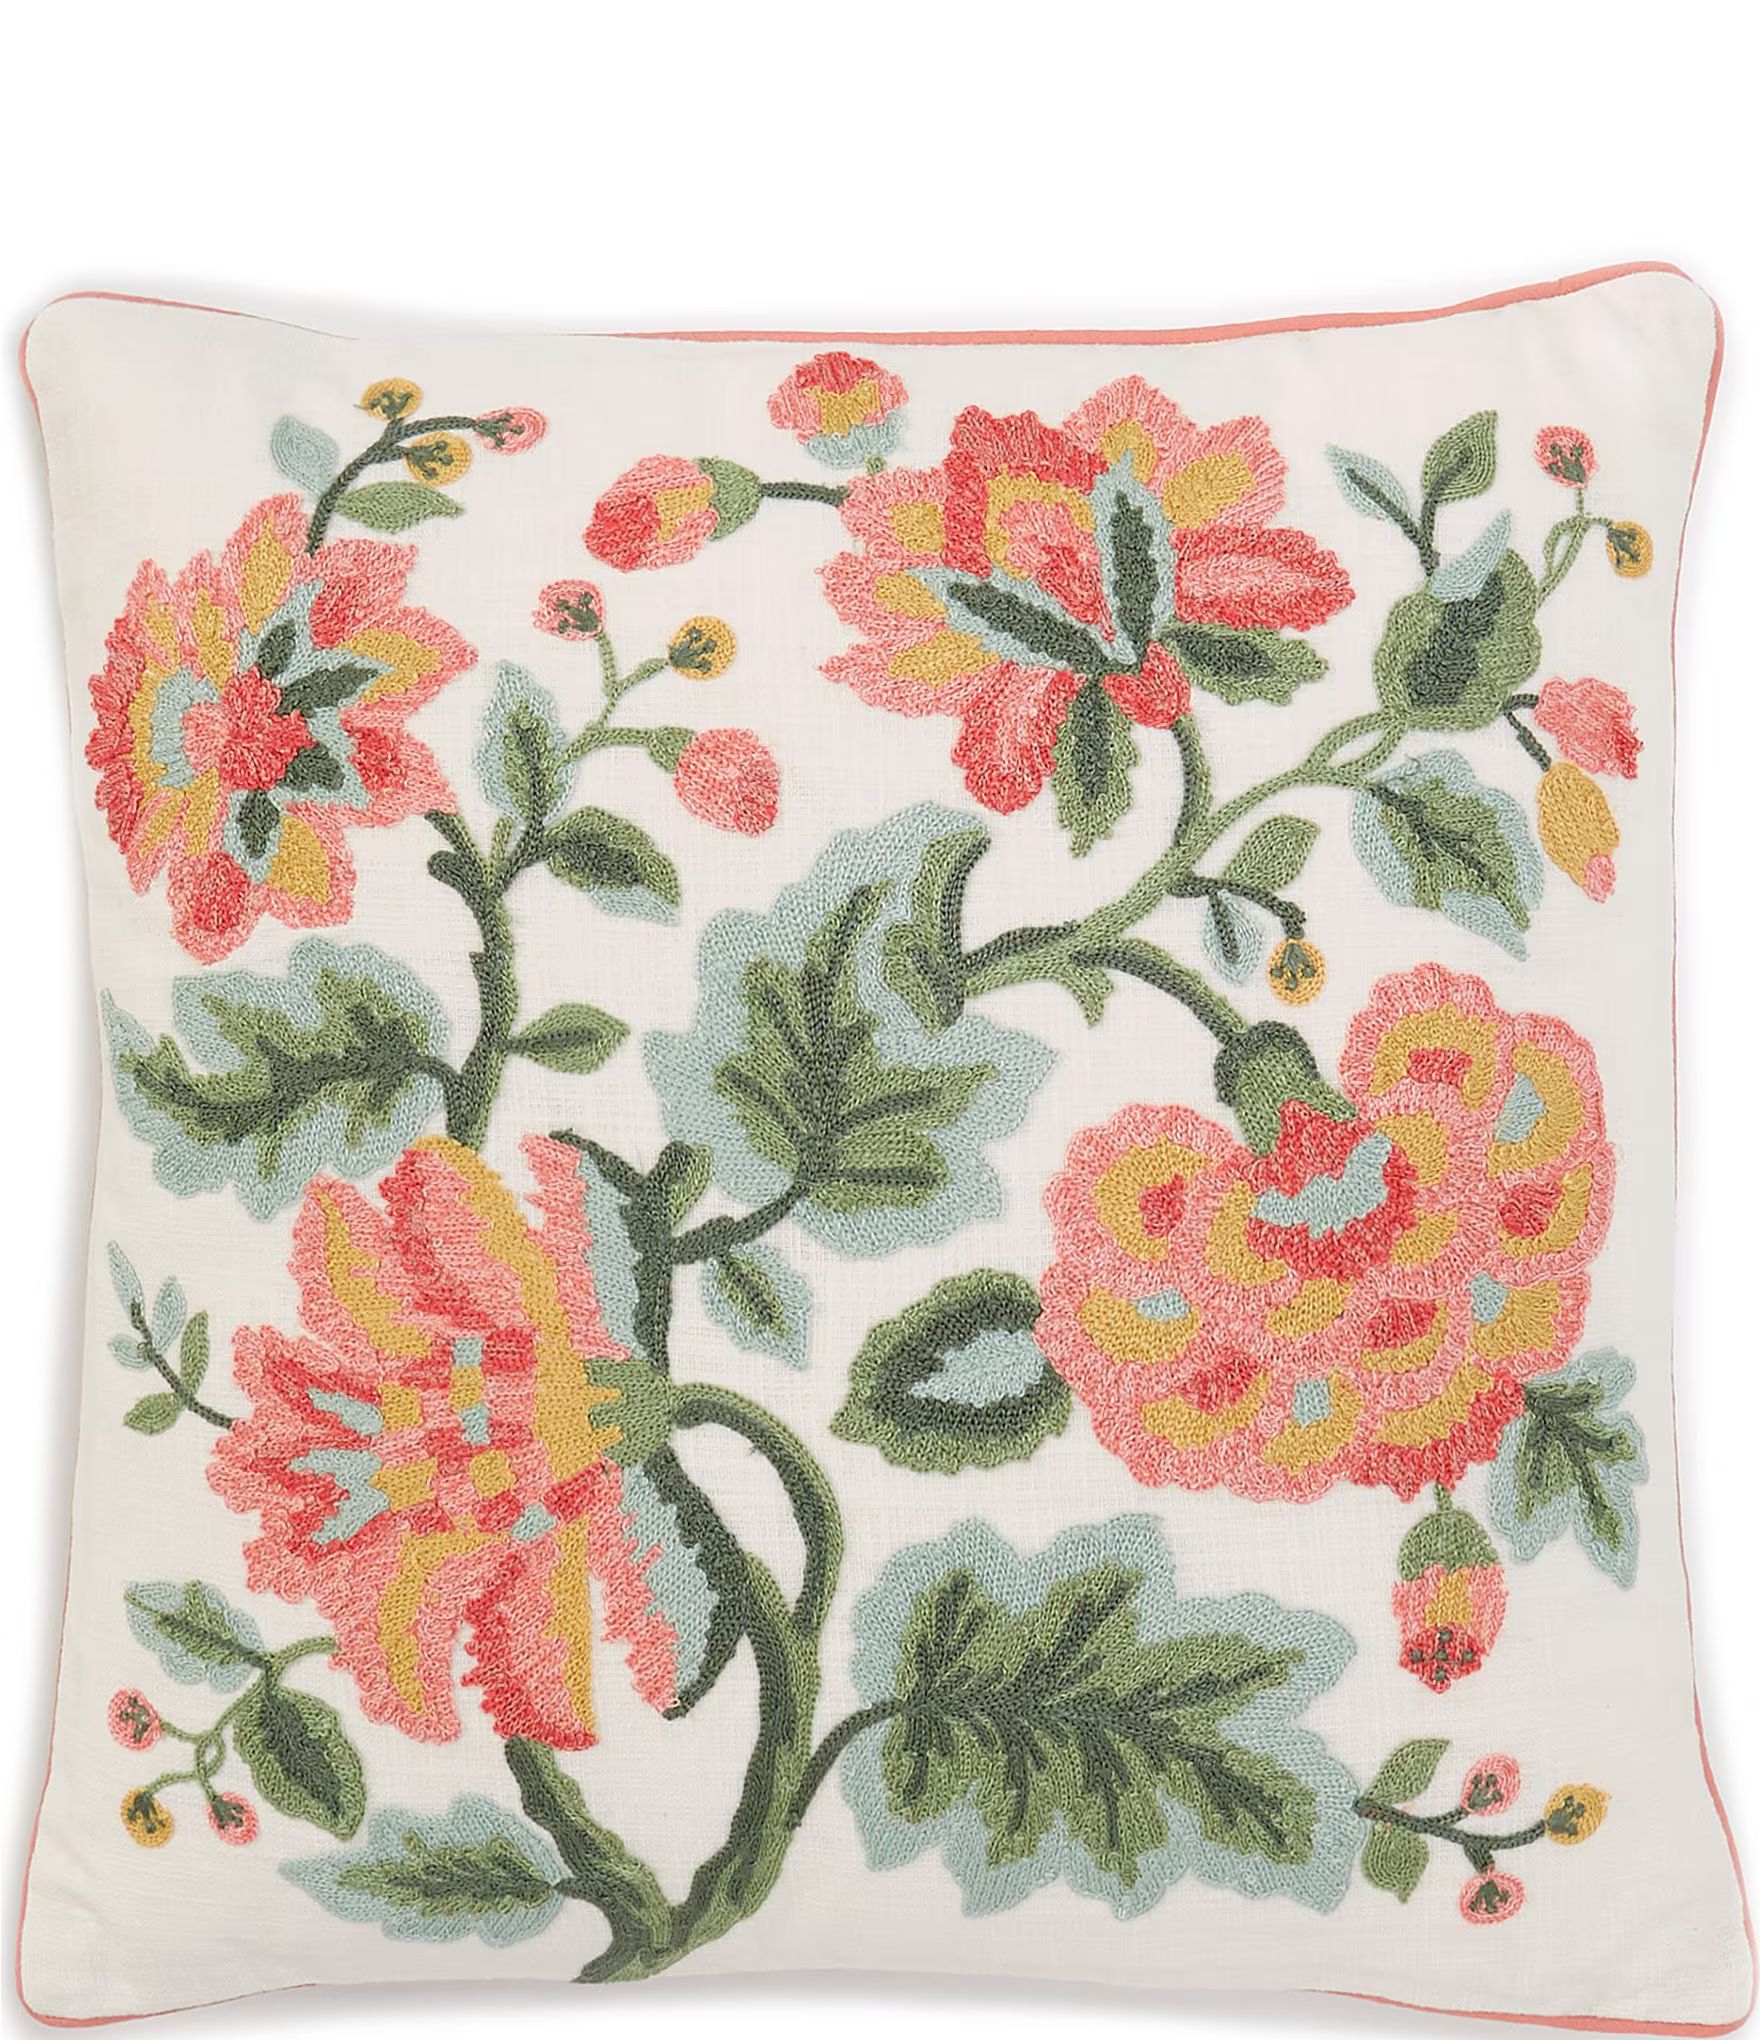 Embroidered Floral Spray Square Pillow | Dillard's